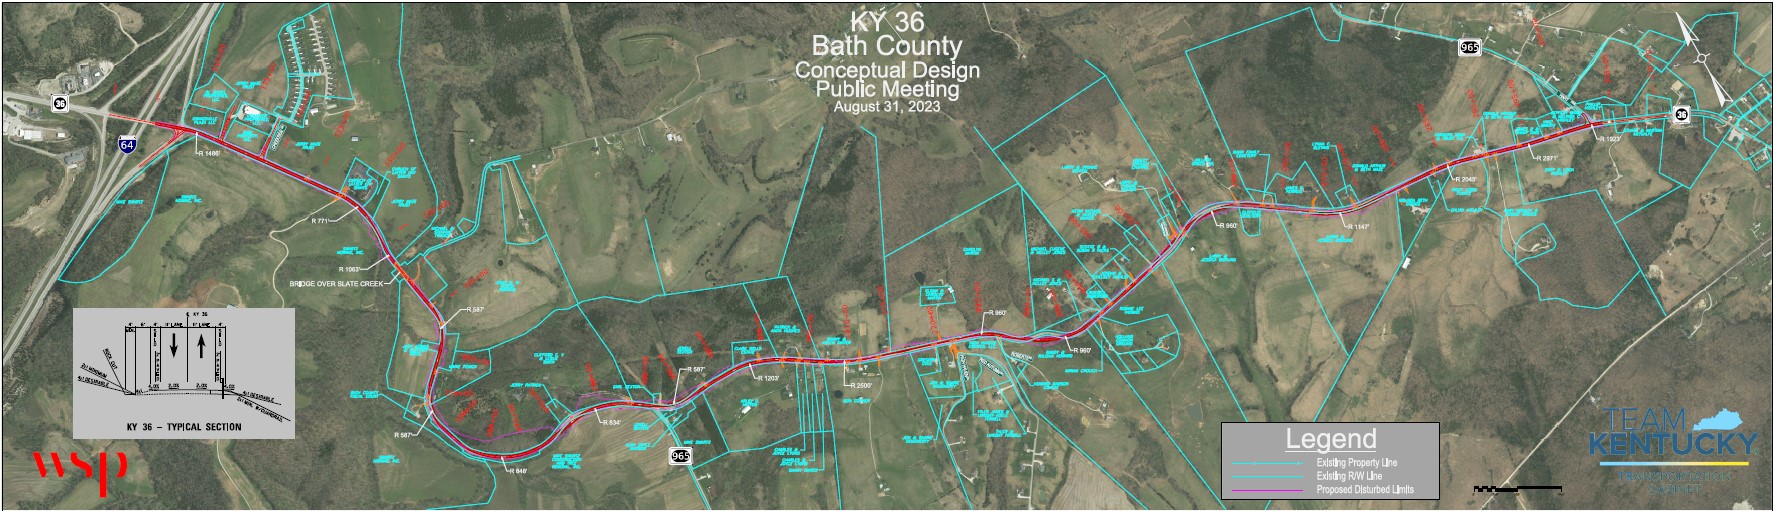 KY 36 Bath County proposed design image